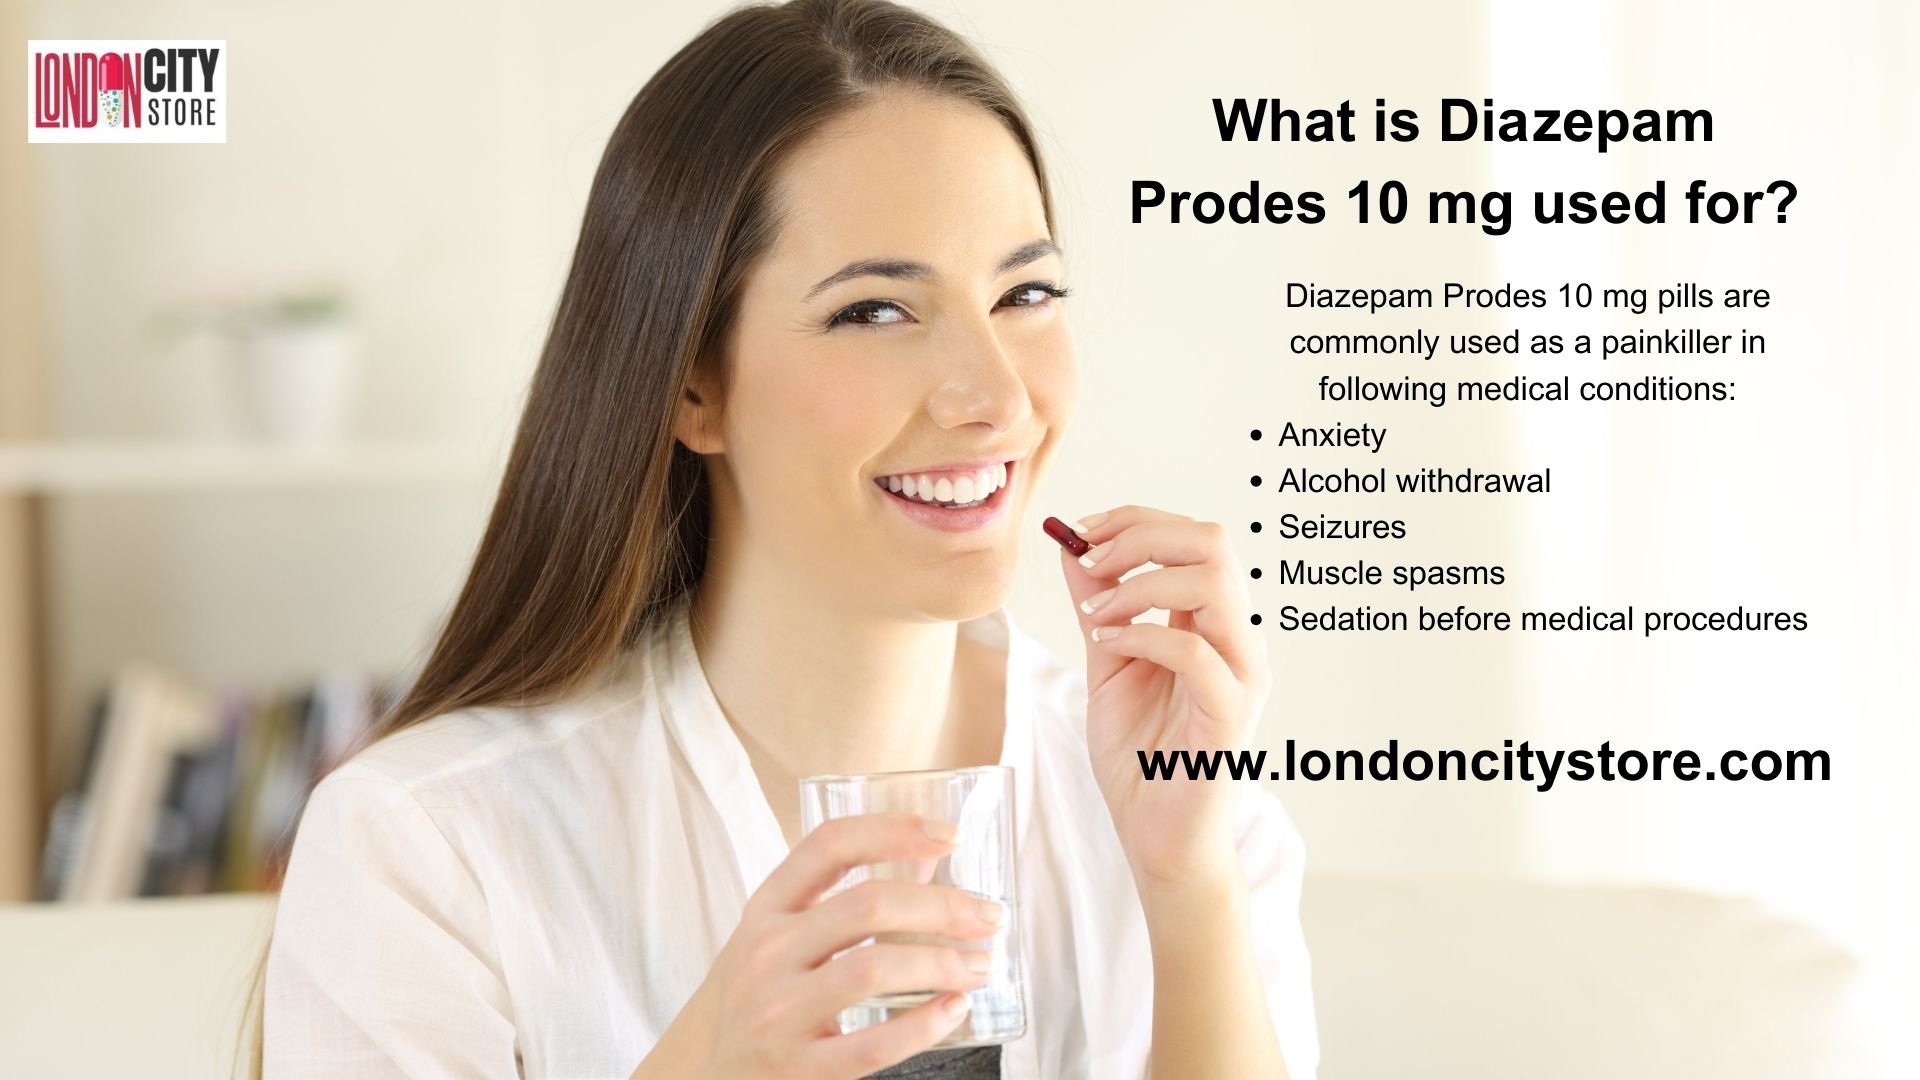 What is Diazepam Prodes 10 mg used for? - Blogsocialnews.com